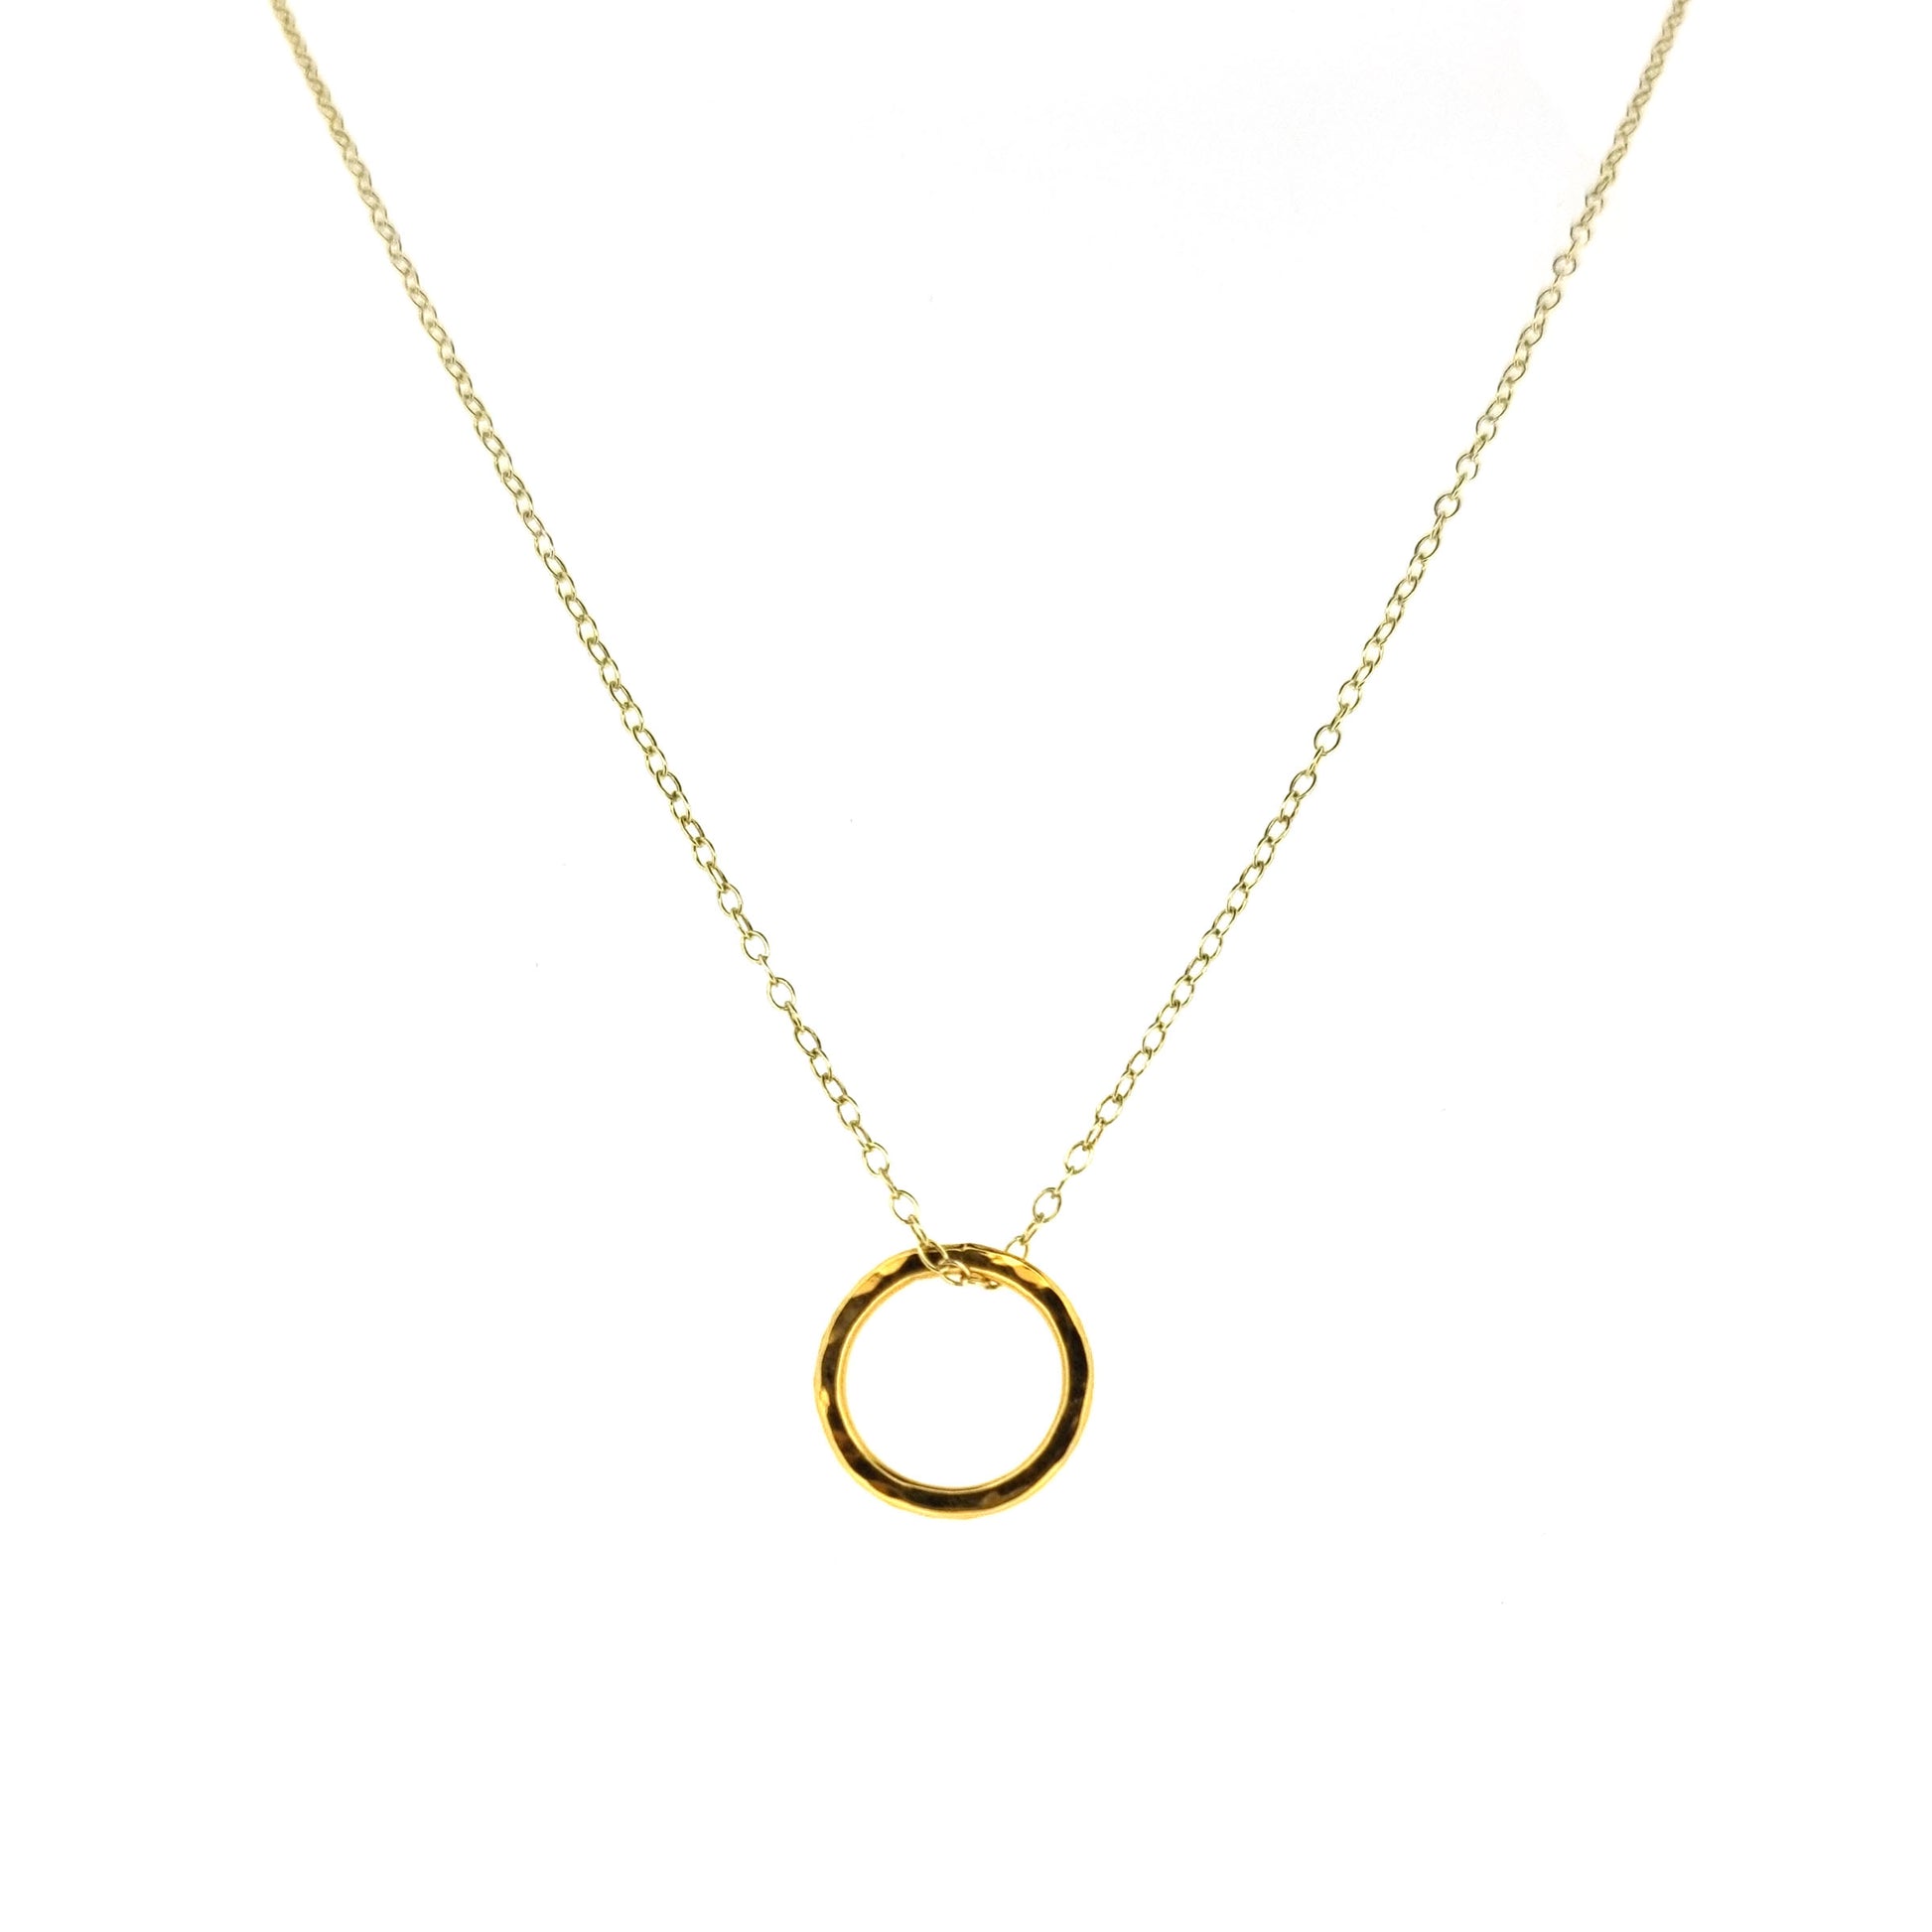 Yellow gold vermeil open circle pendant with hammered texture on a yellow gold vermeil chain. Small